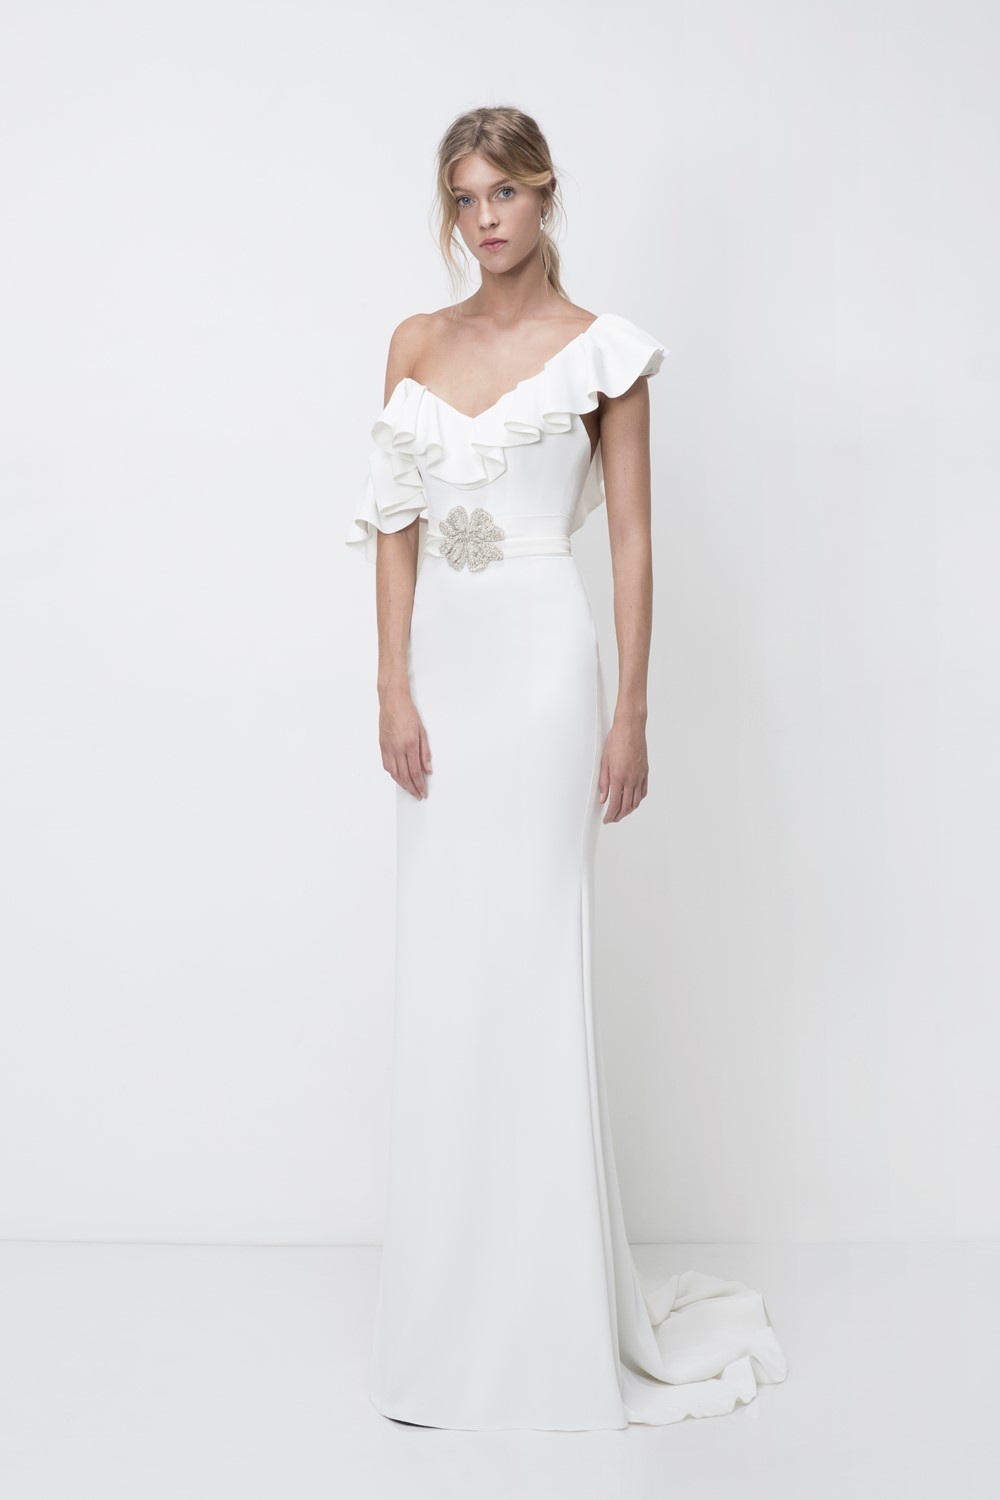 Stella Wedding Dress from Lihi Hod's 2018 Bridal Collection